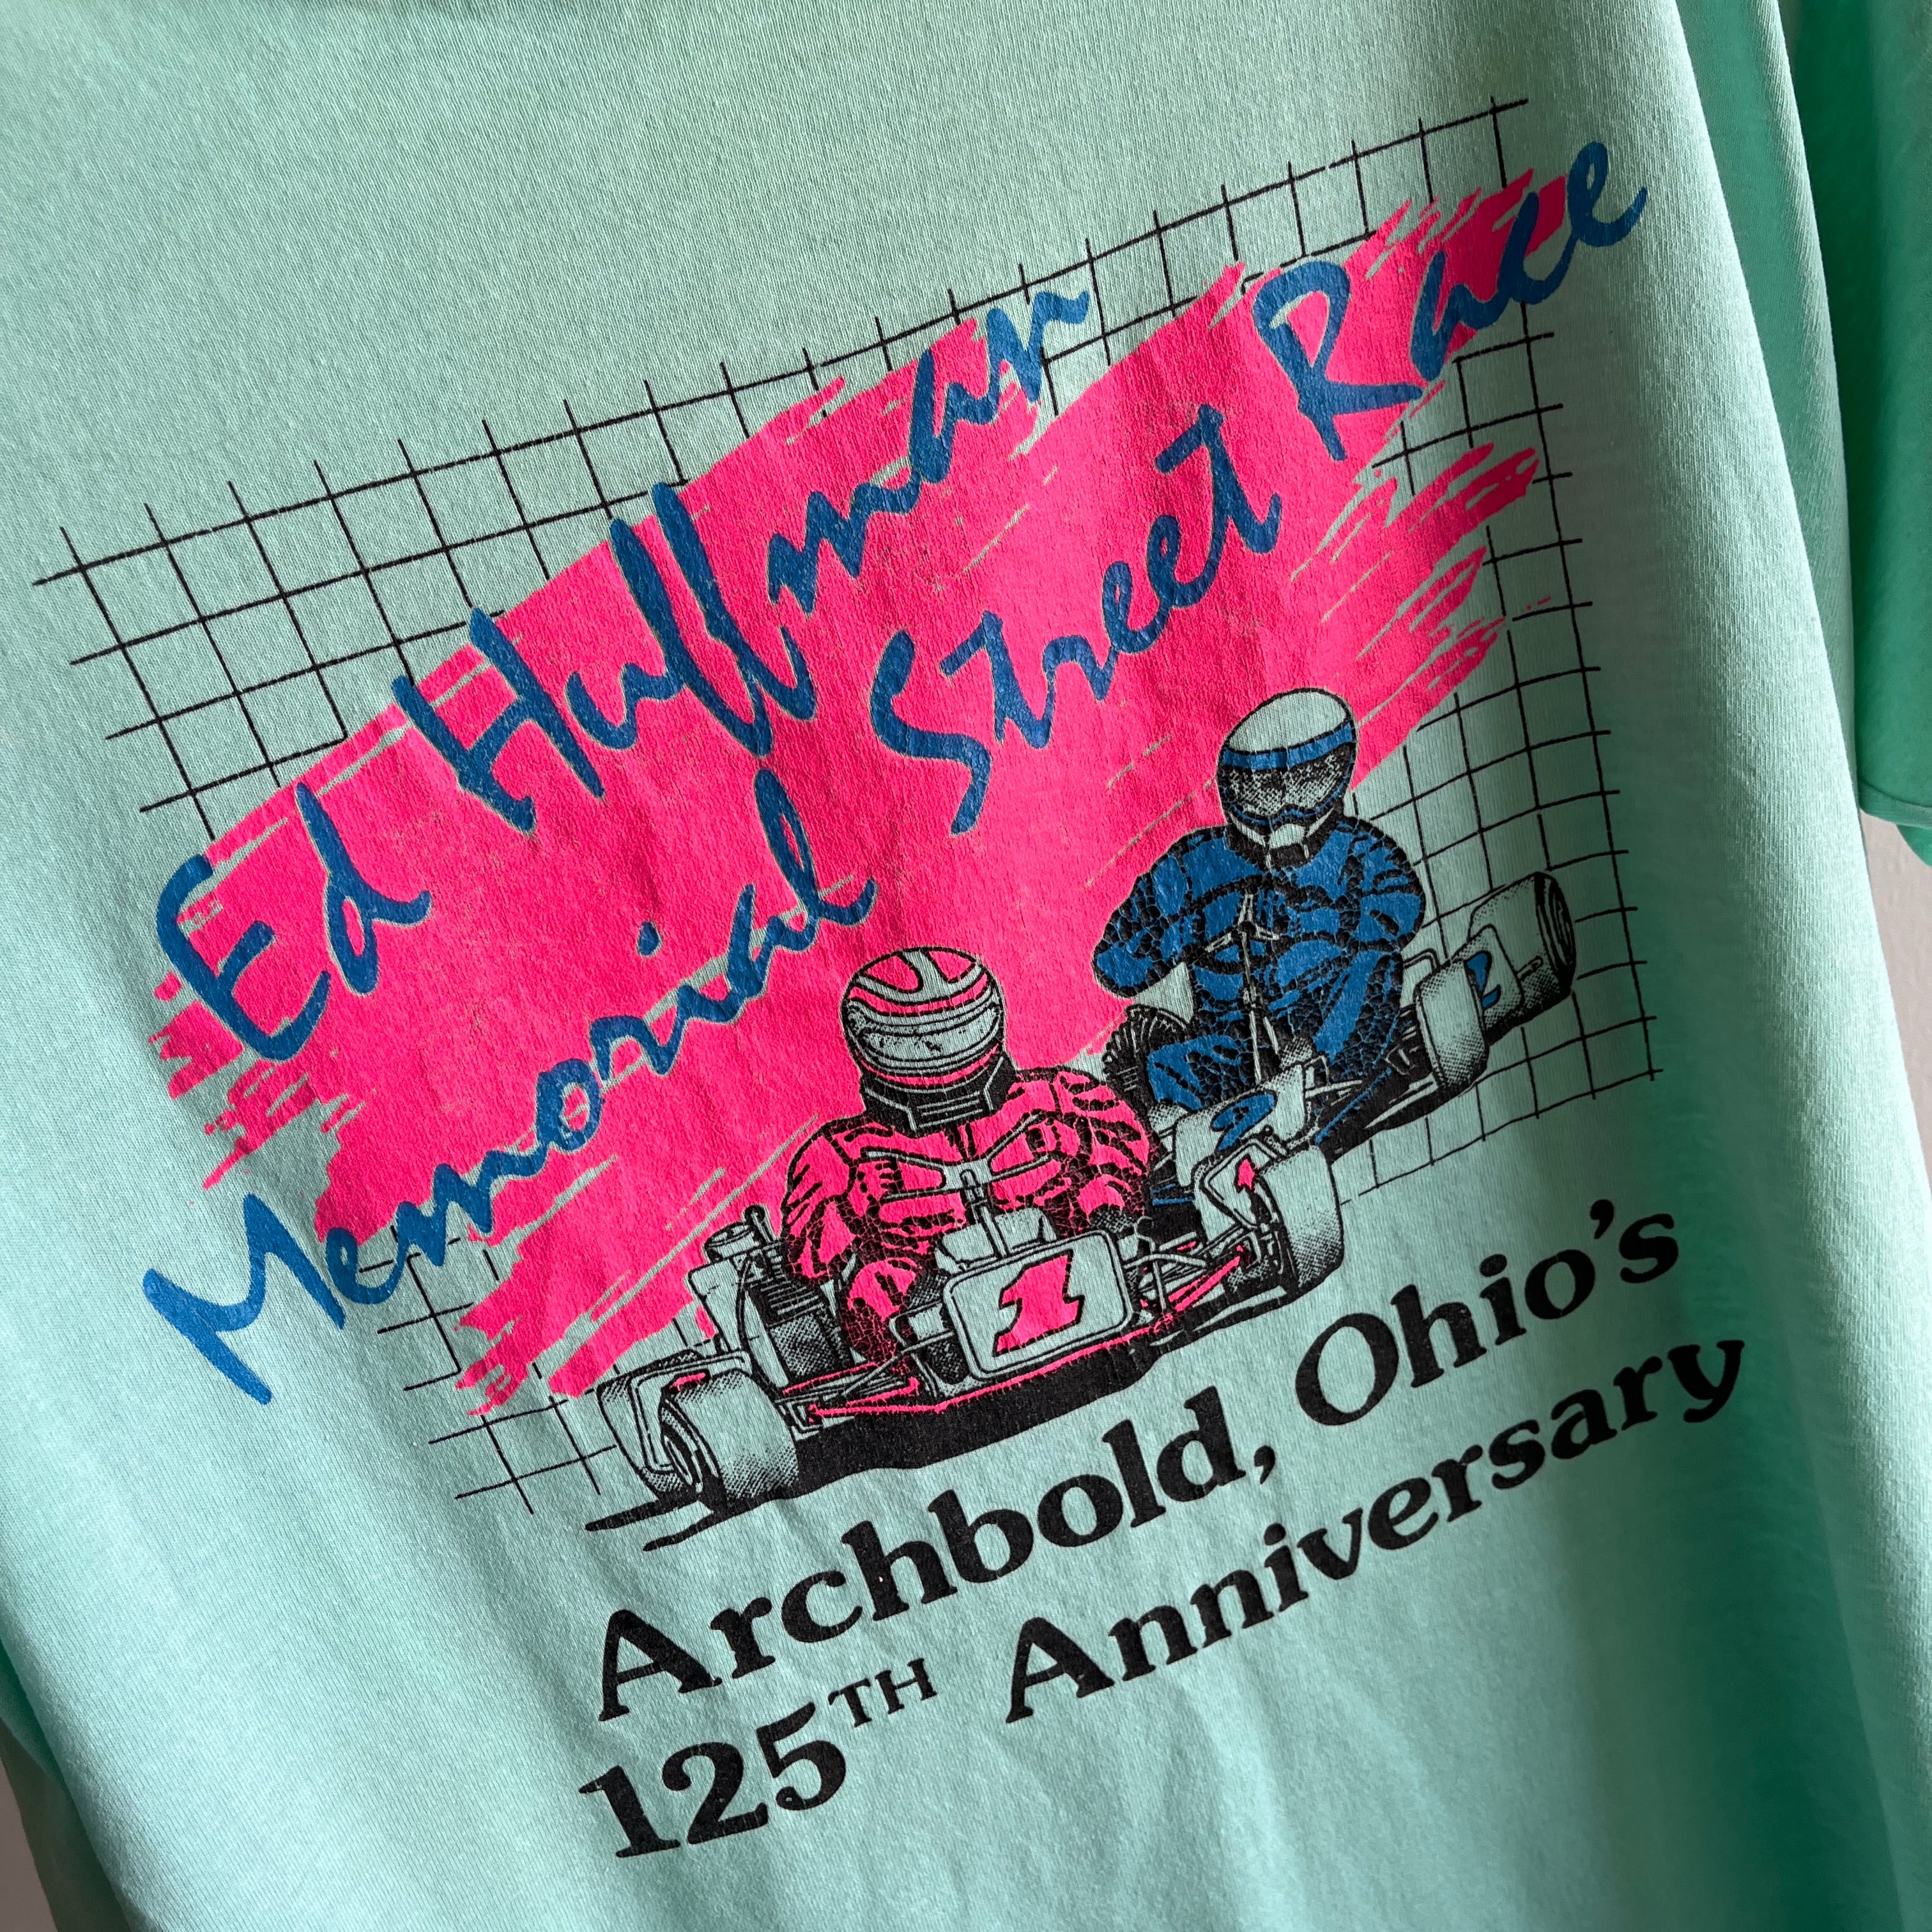 1980s Drag Racing T-Shirt from Ohio